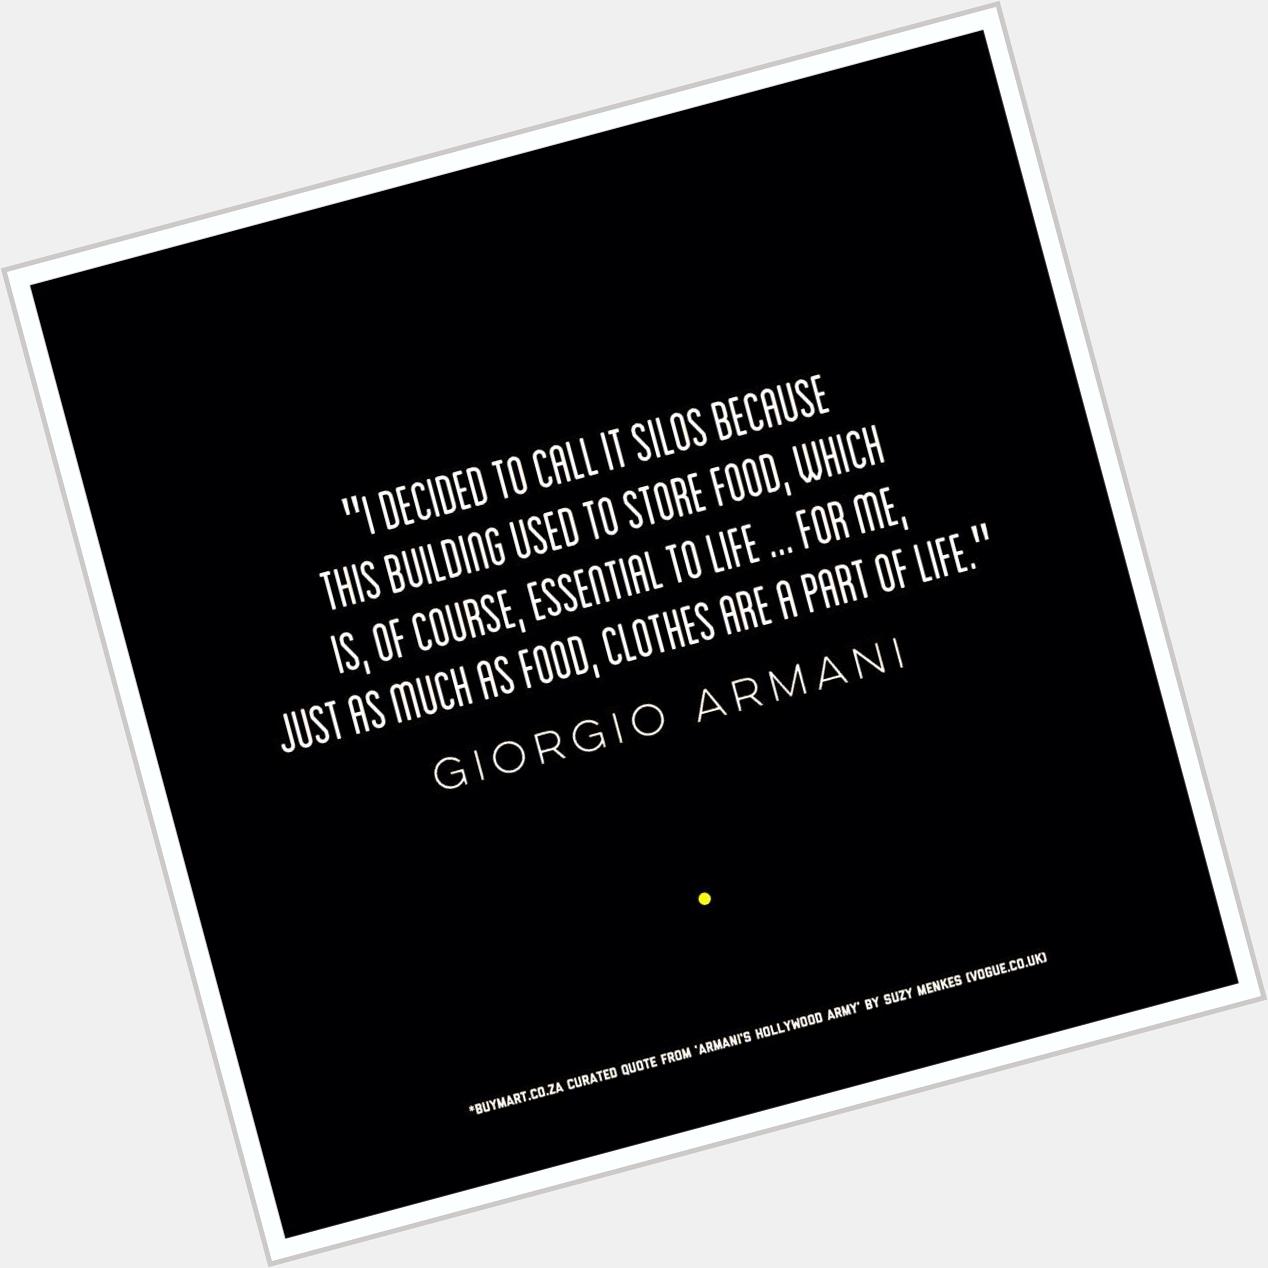 Happy Birthday Giorgio Armani! Our thoughts exactly.    